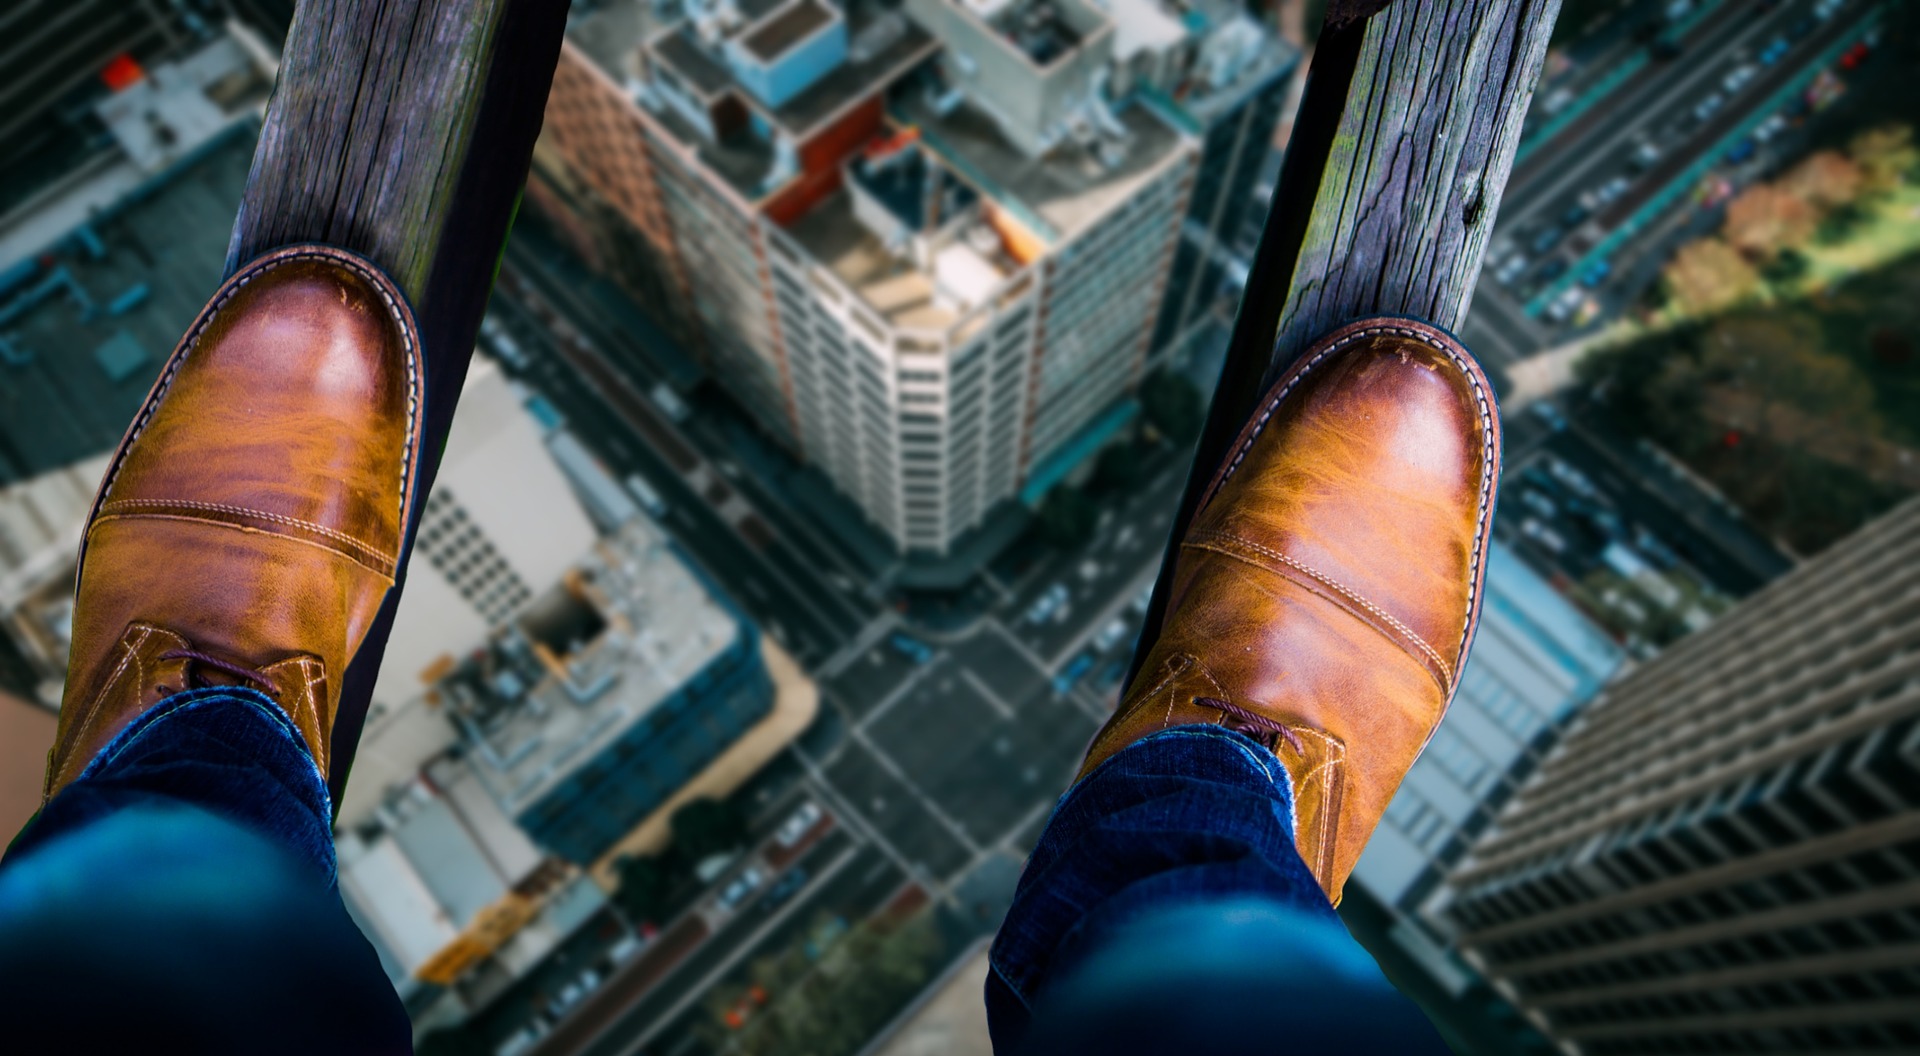 Looking down at a man's shoes as he stands on two thin wooden beams, high above a city street